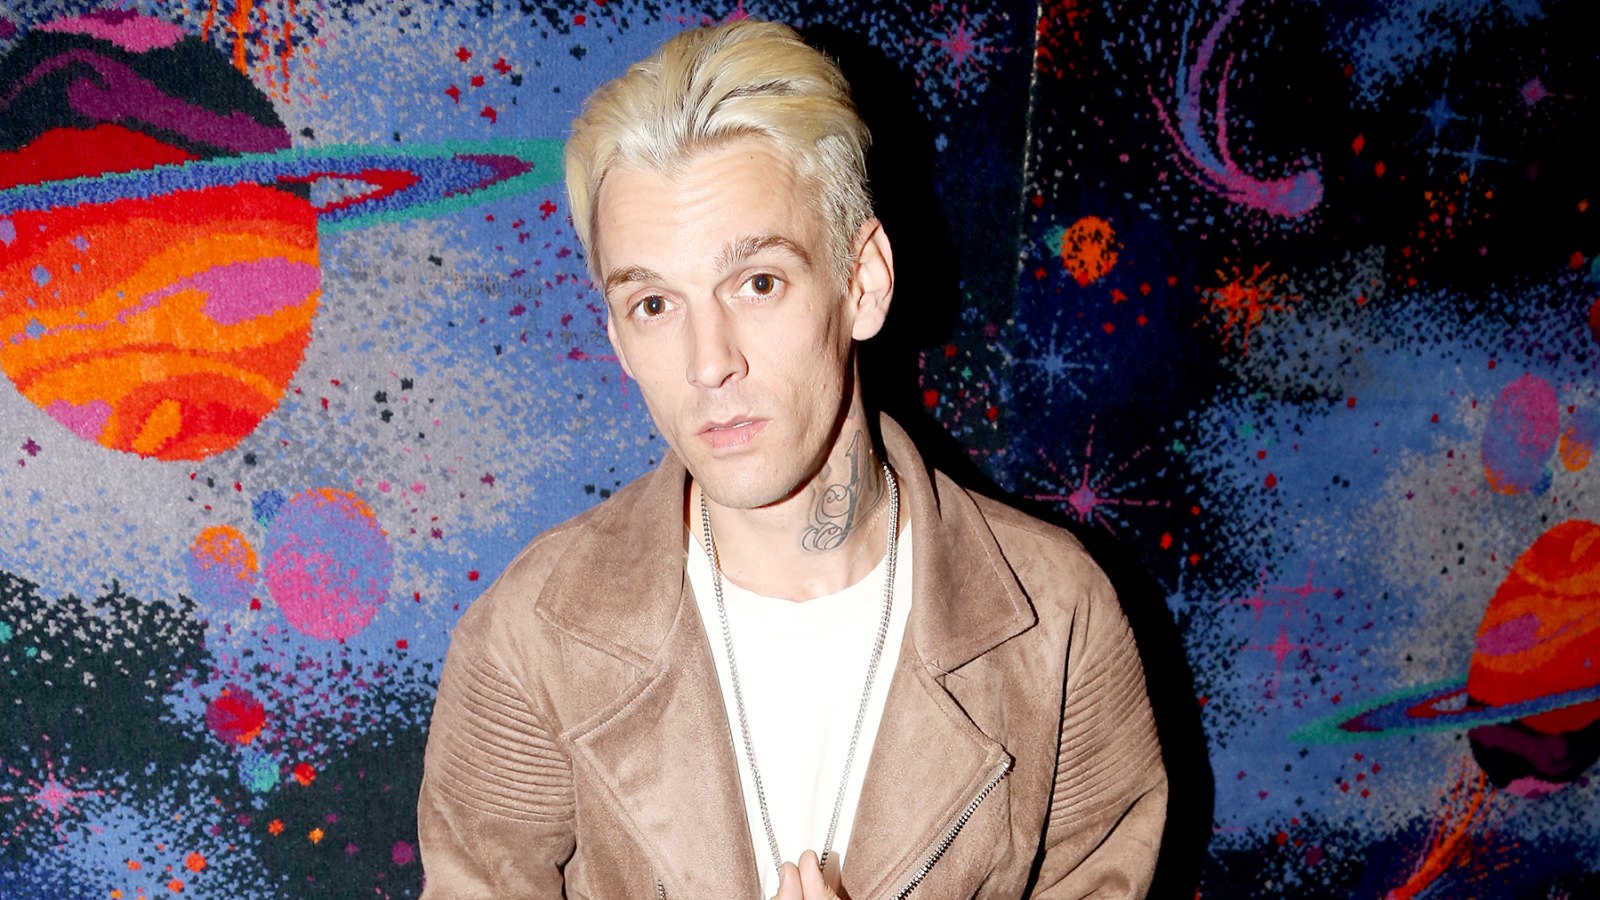 Aaron Carter poses during a handprint ceremony and meet & greet with fans as he visits Planet Hollywood Times Square on April 24, 2017 in New York City.